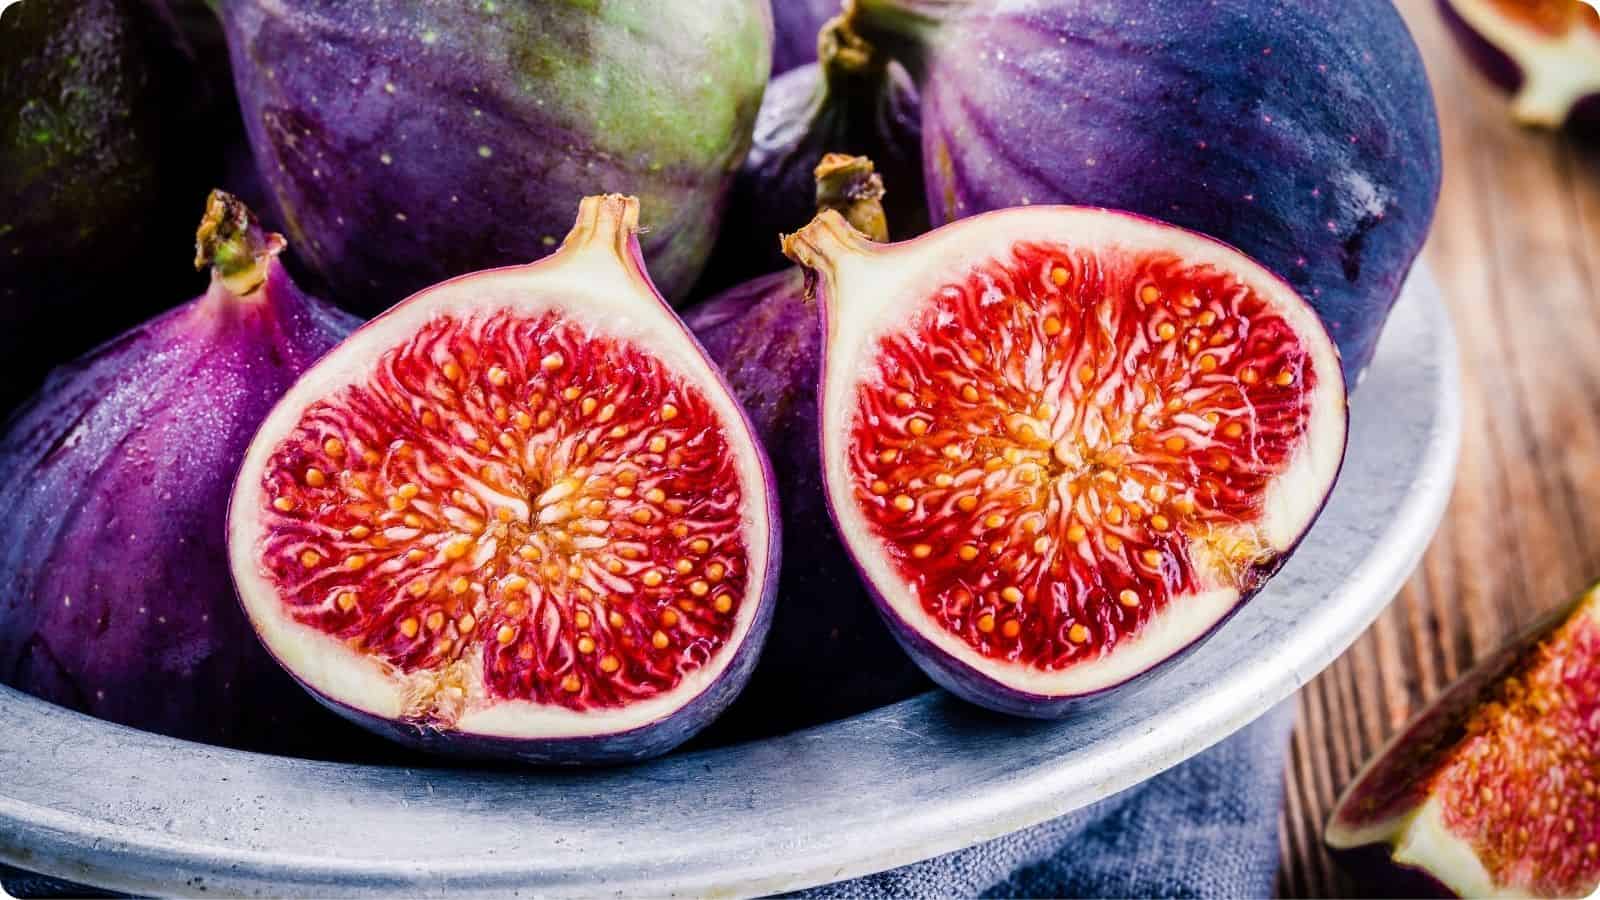 Figs in a mixing bowl place on top of a wooden table.
